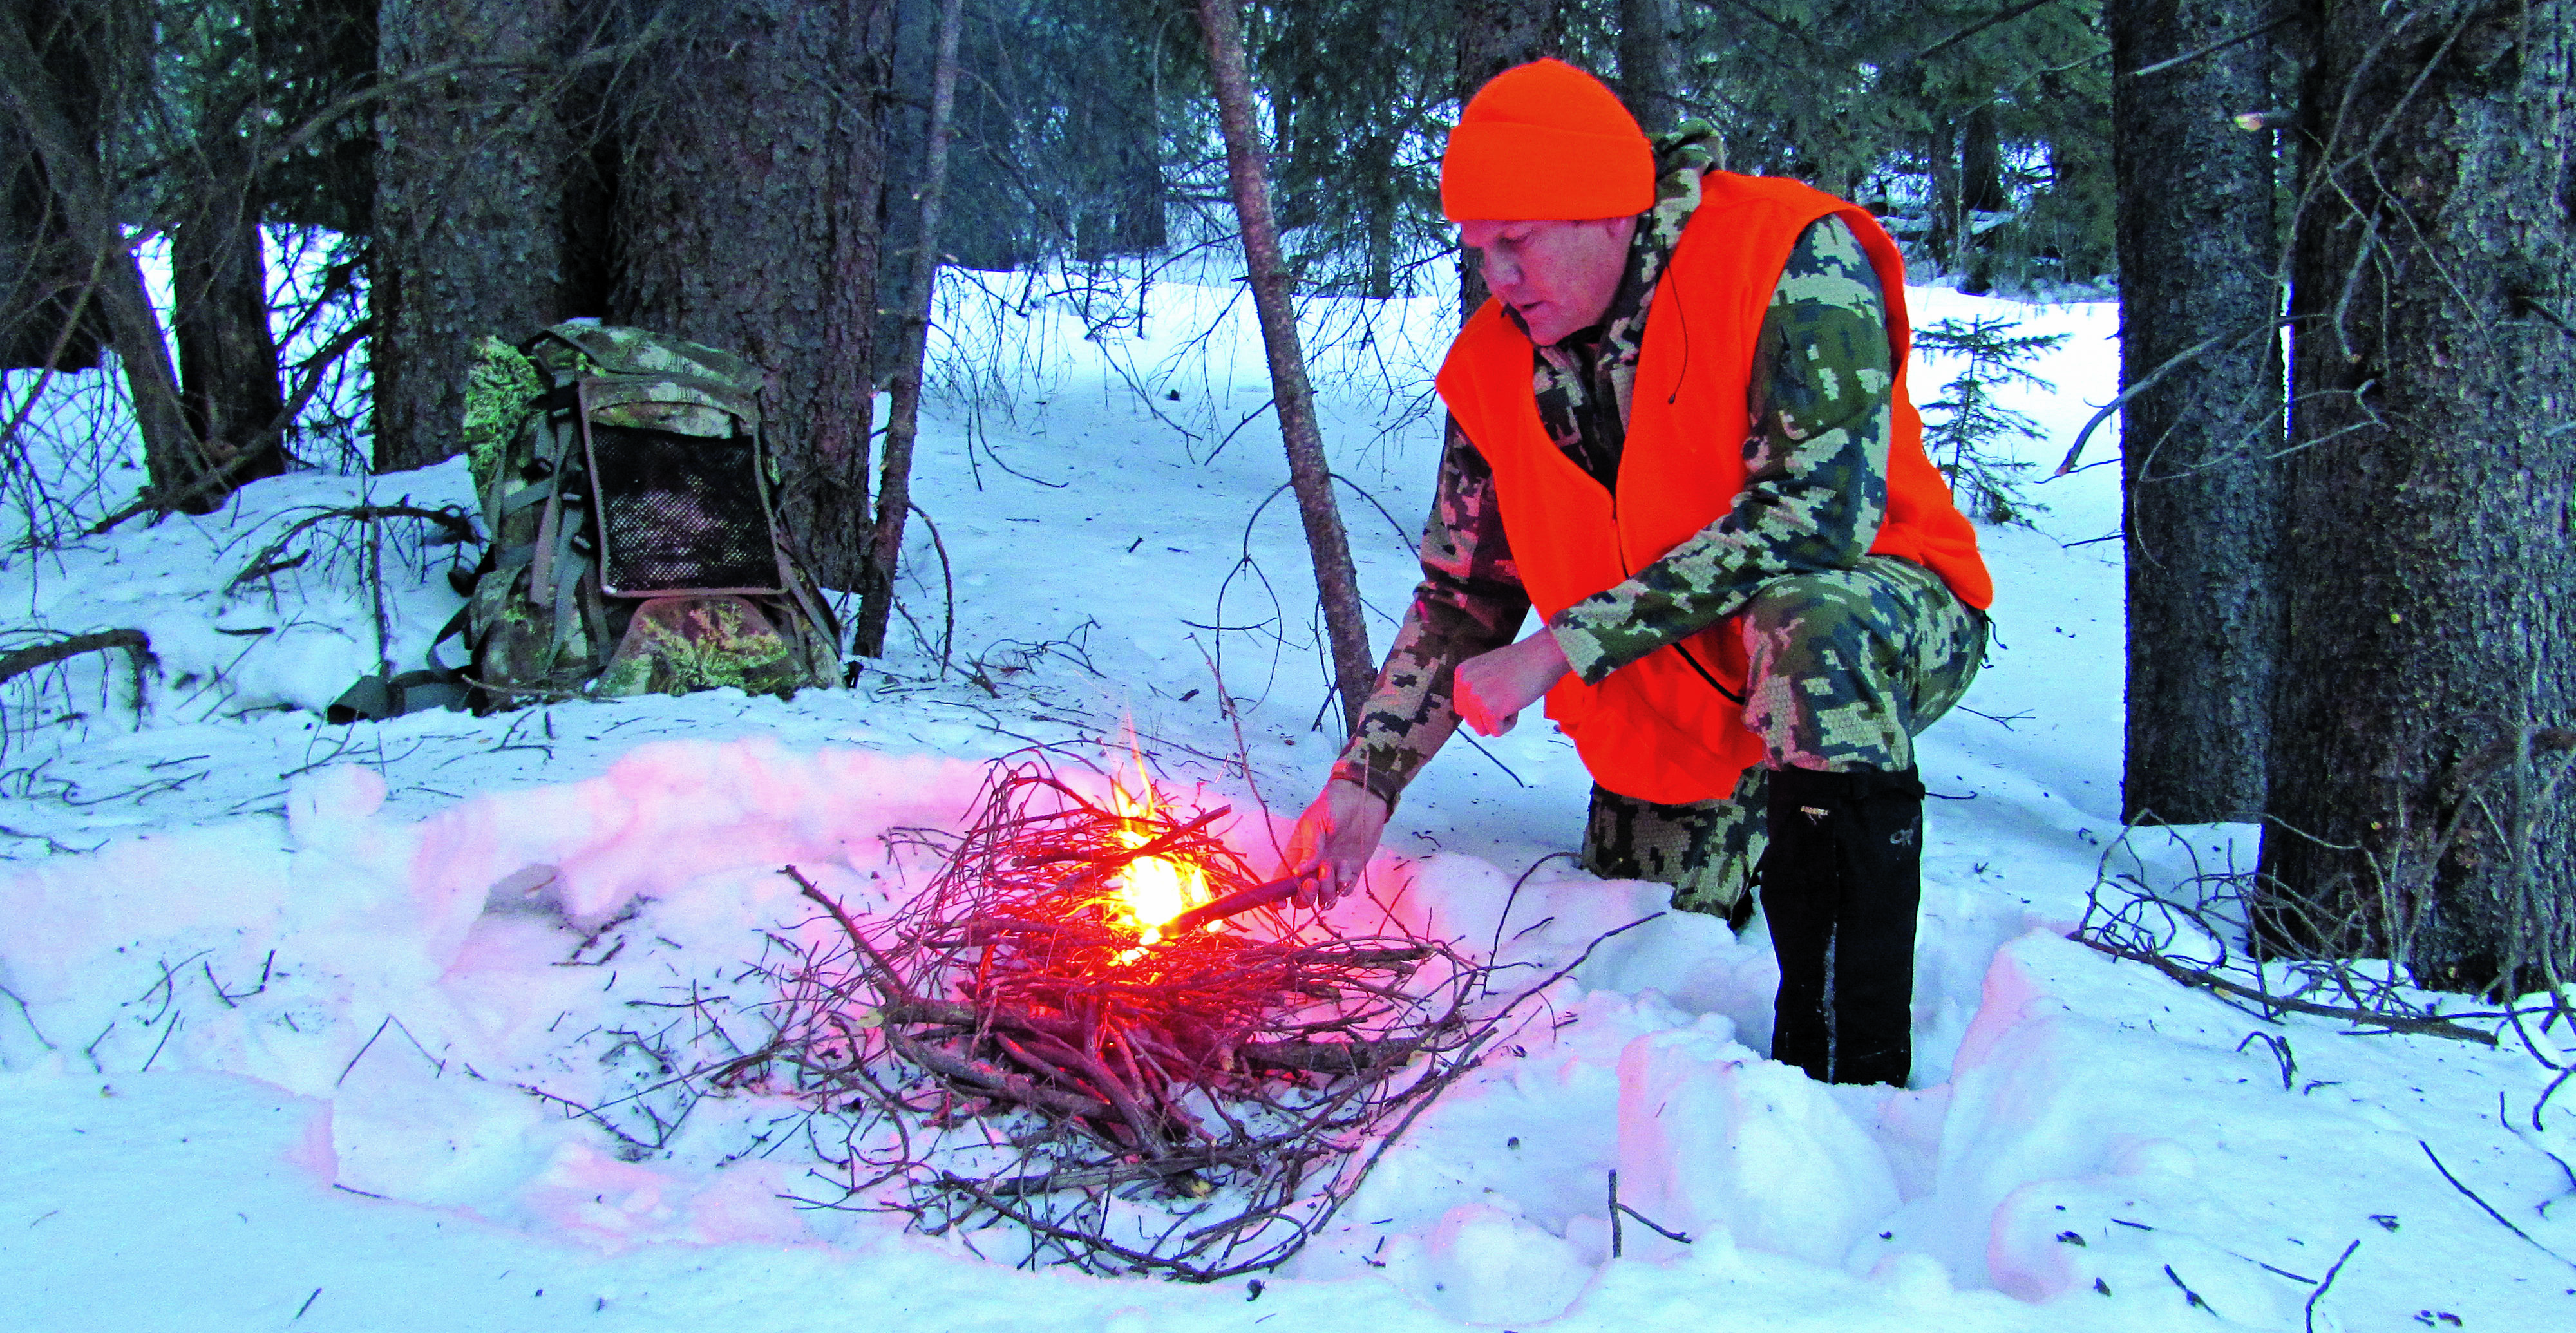 building a fire to prevent hypothermia